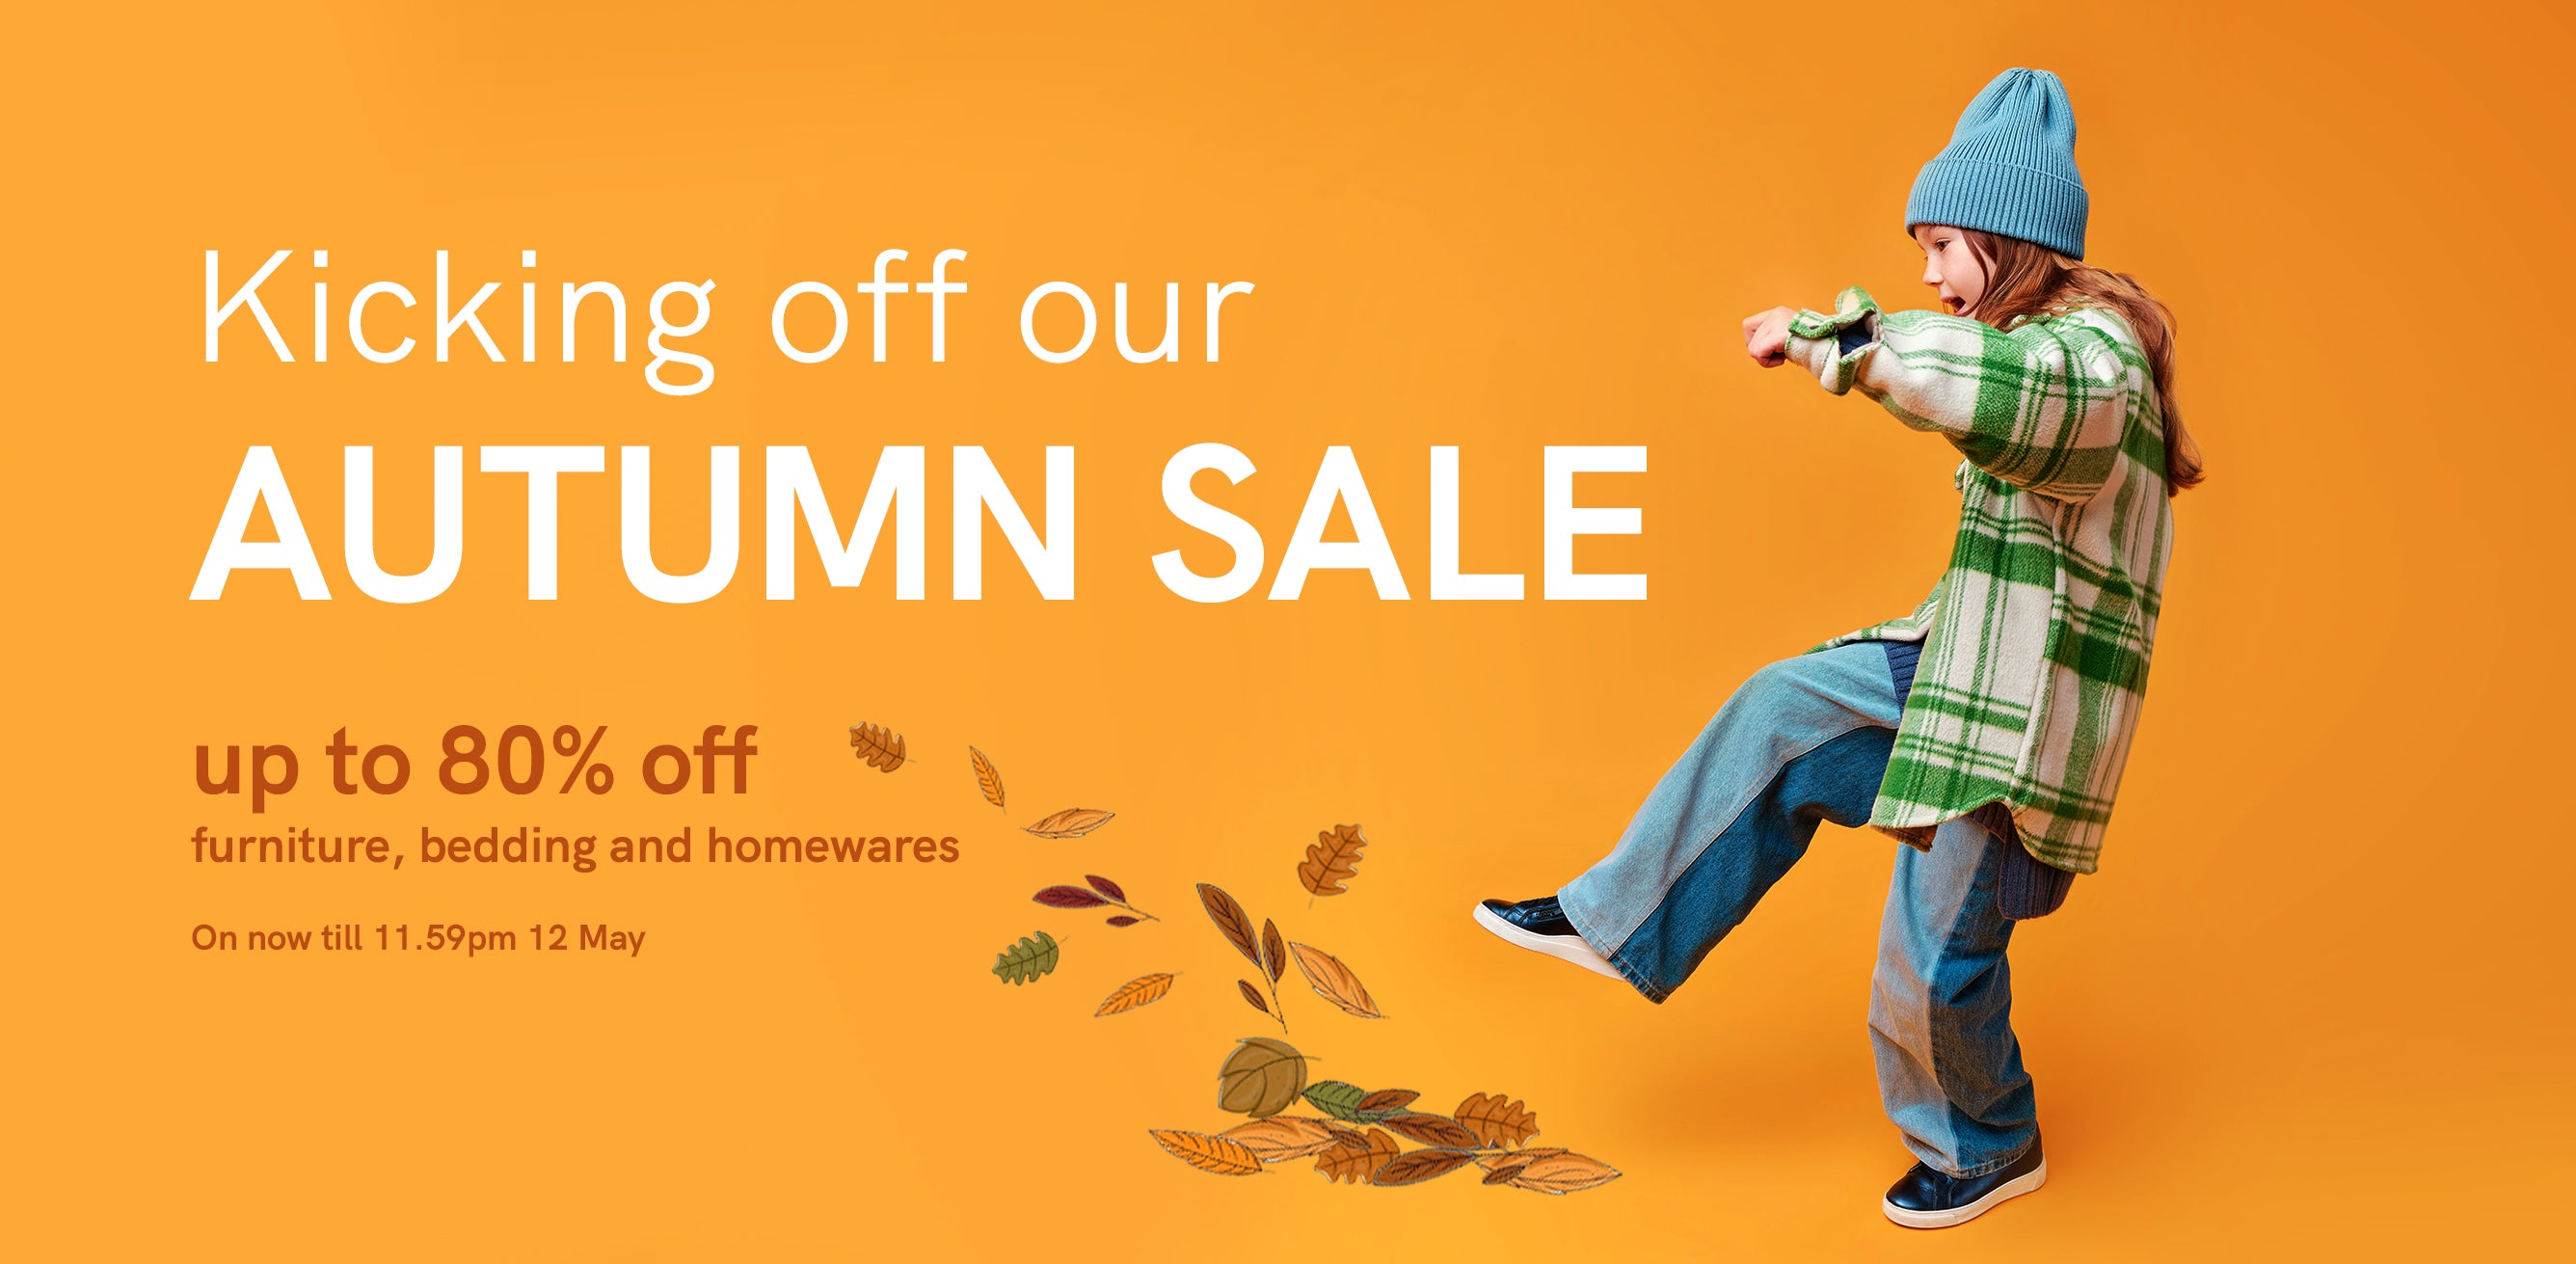 Kicking off our Autumn Sale - with up to 80% off kids lighting, bedding, furniture, artwork and more. Sale ends 12th May.